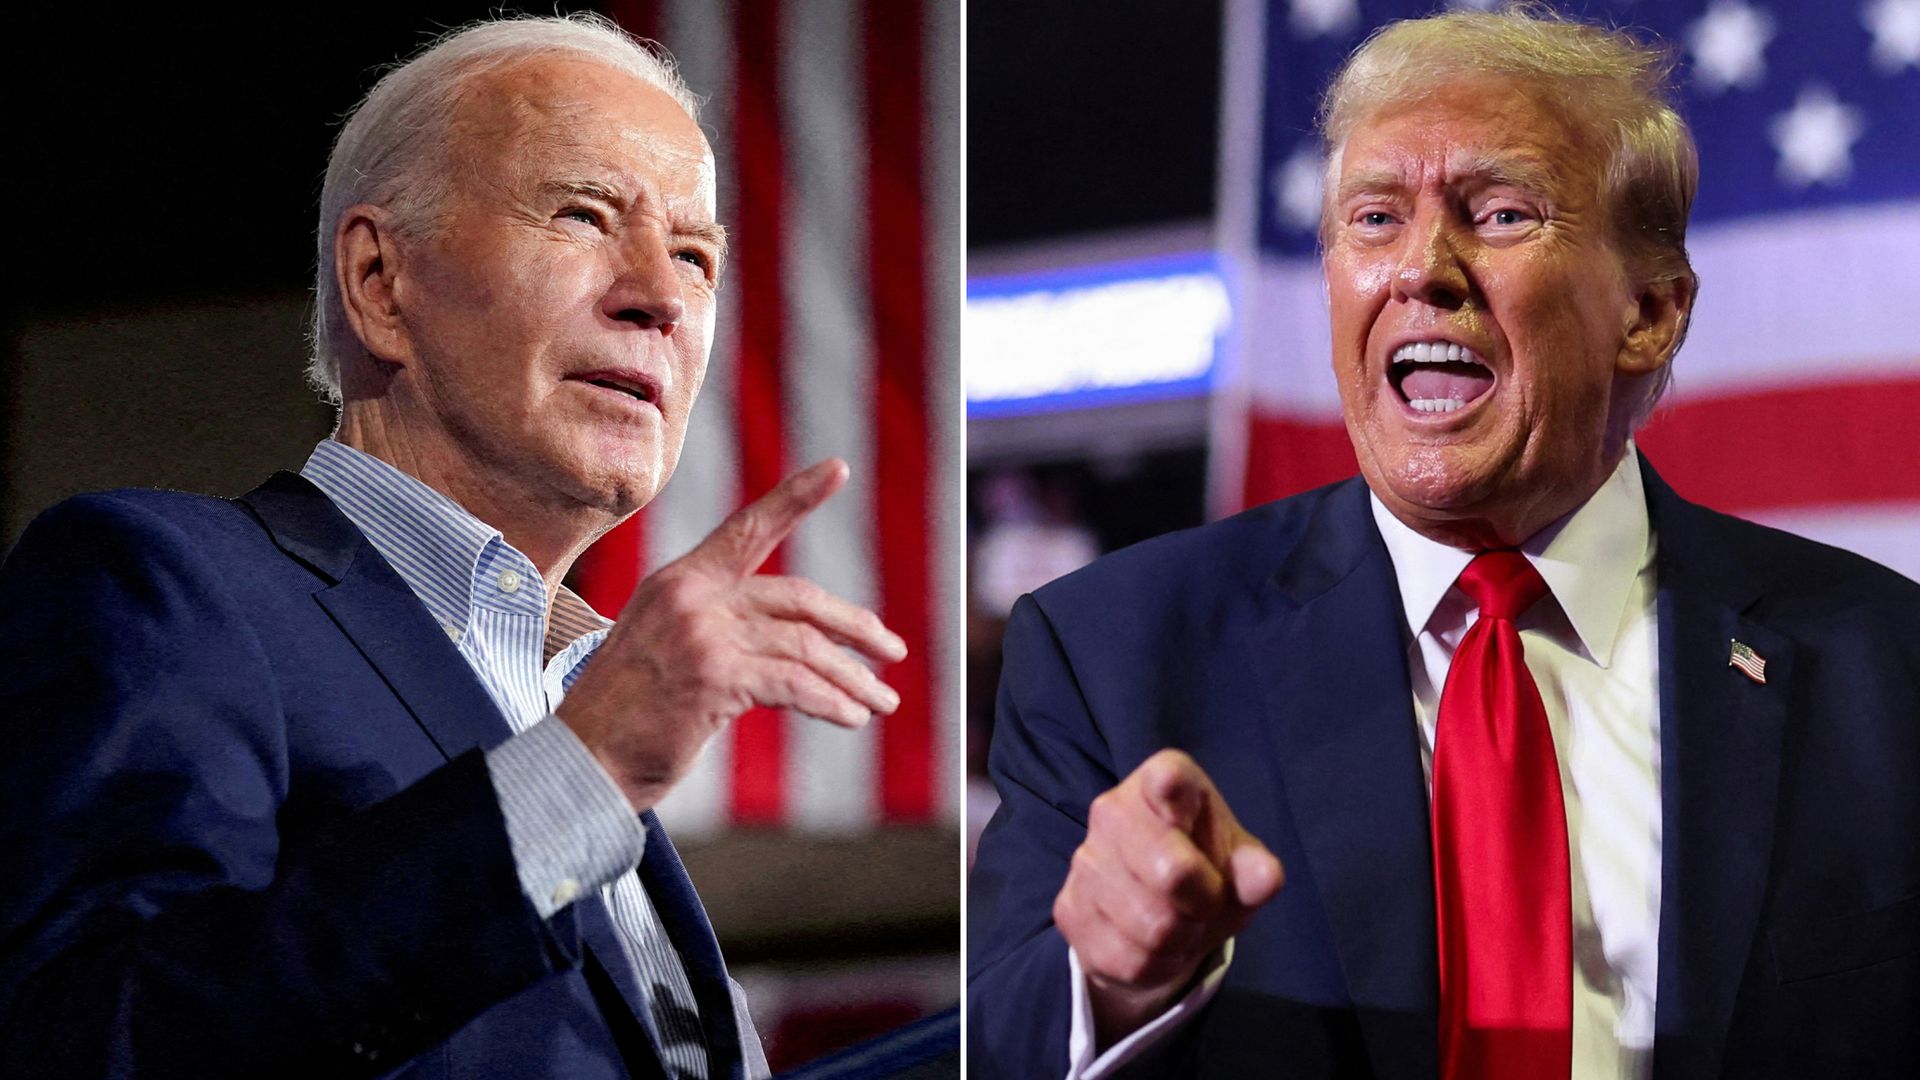 Live presidential debate might expose an ageing Biden while lack of audience could stump Trump 